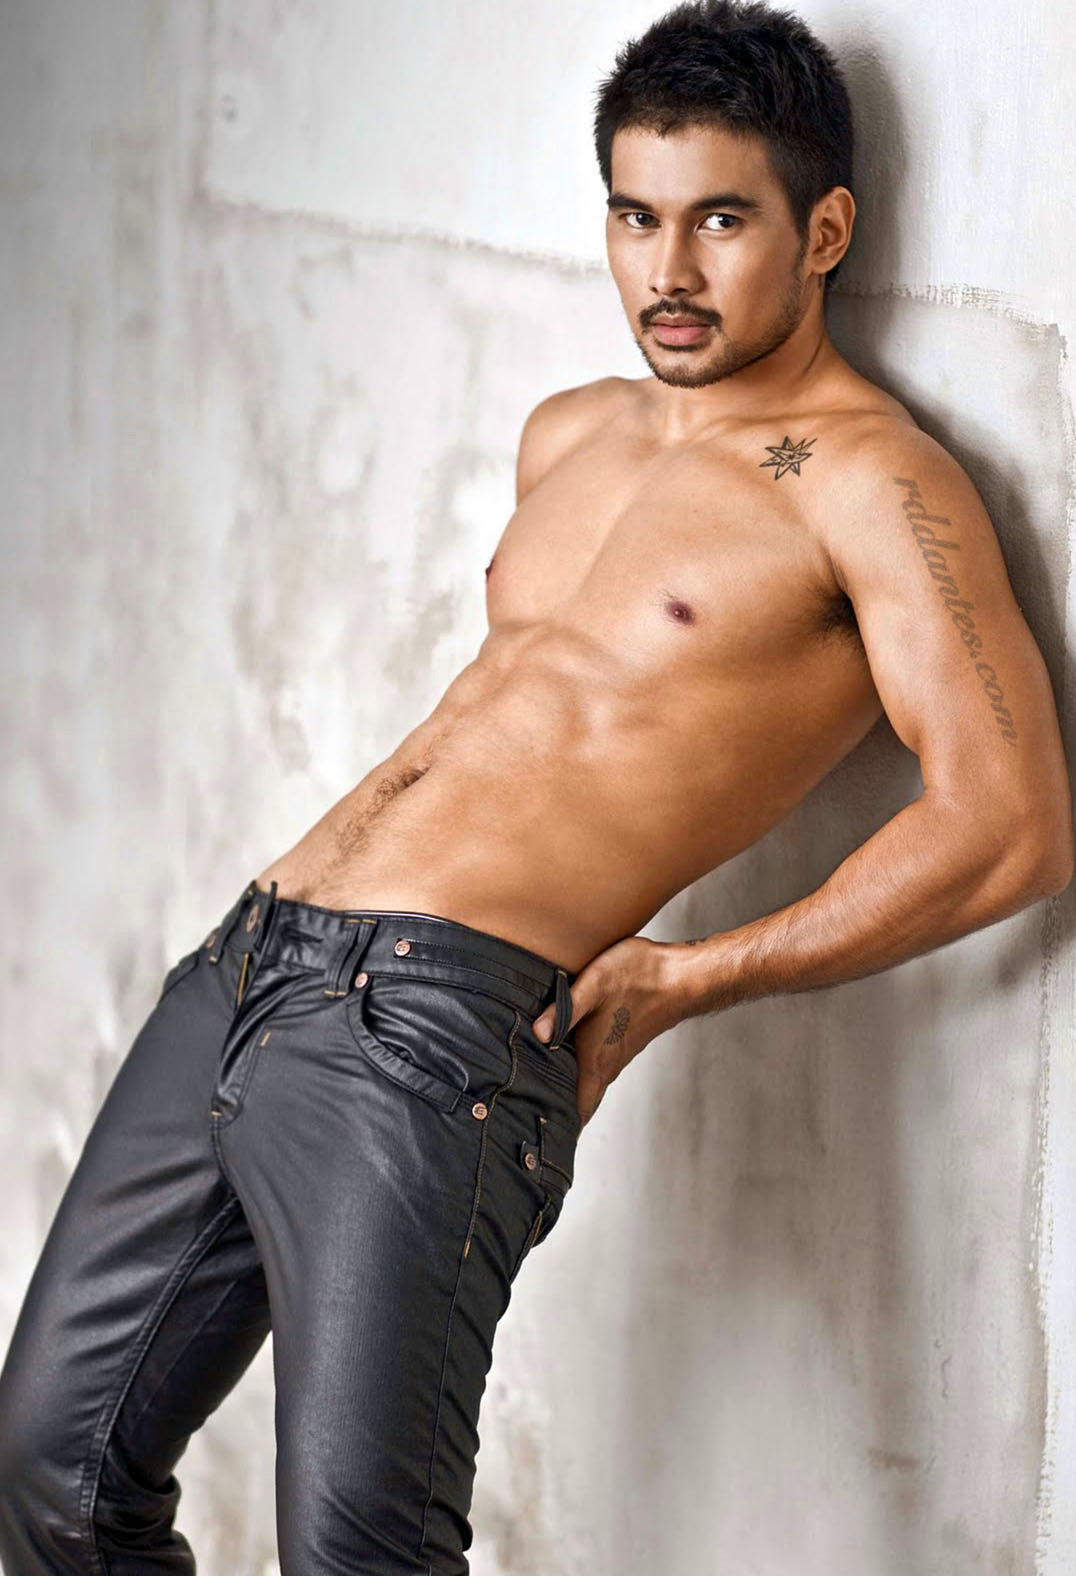 Joem Bascon Gorgeous Pinoy Actor Hot Asian Guys Male Models Actors And Male Celebrities